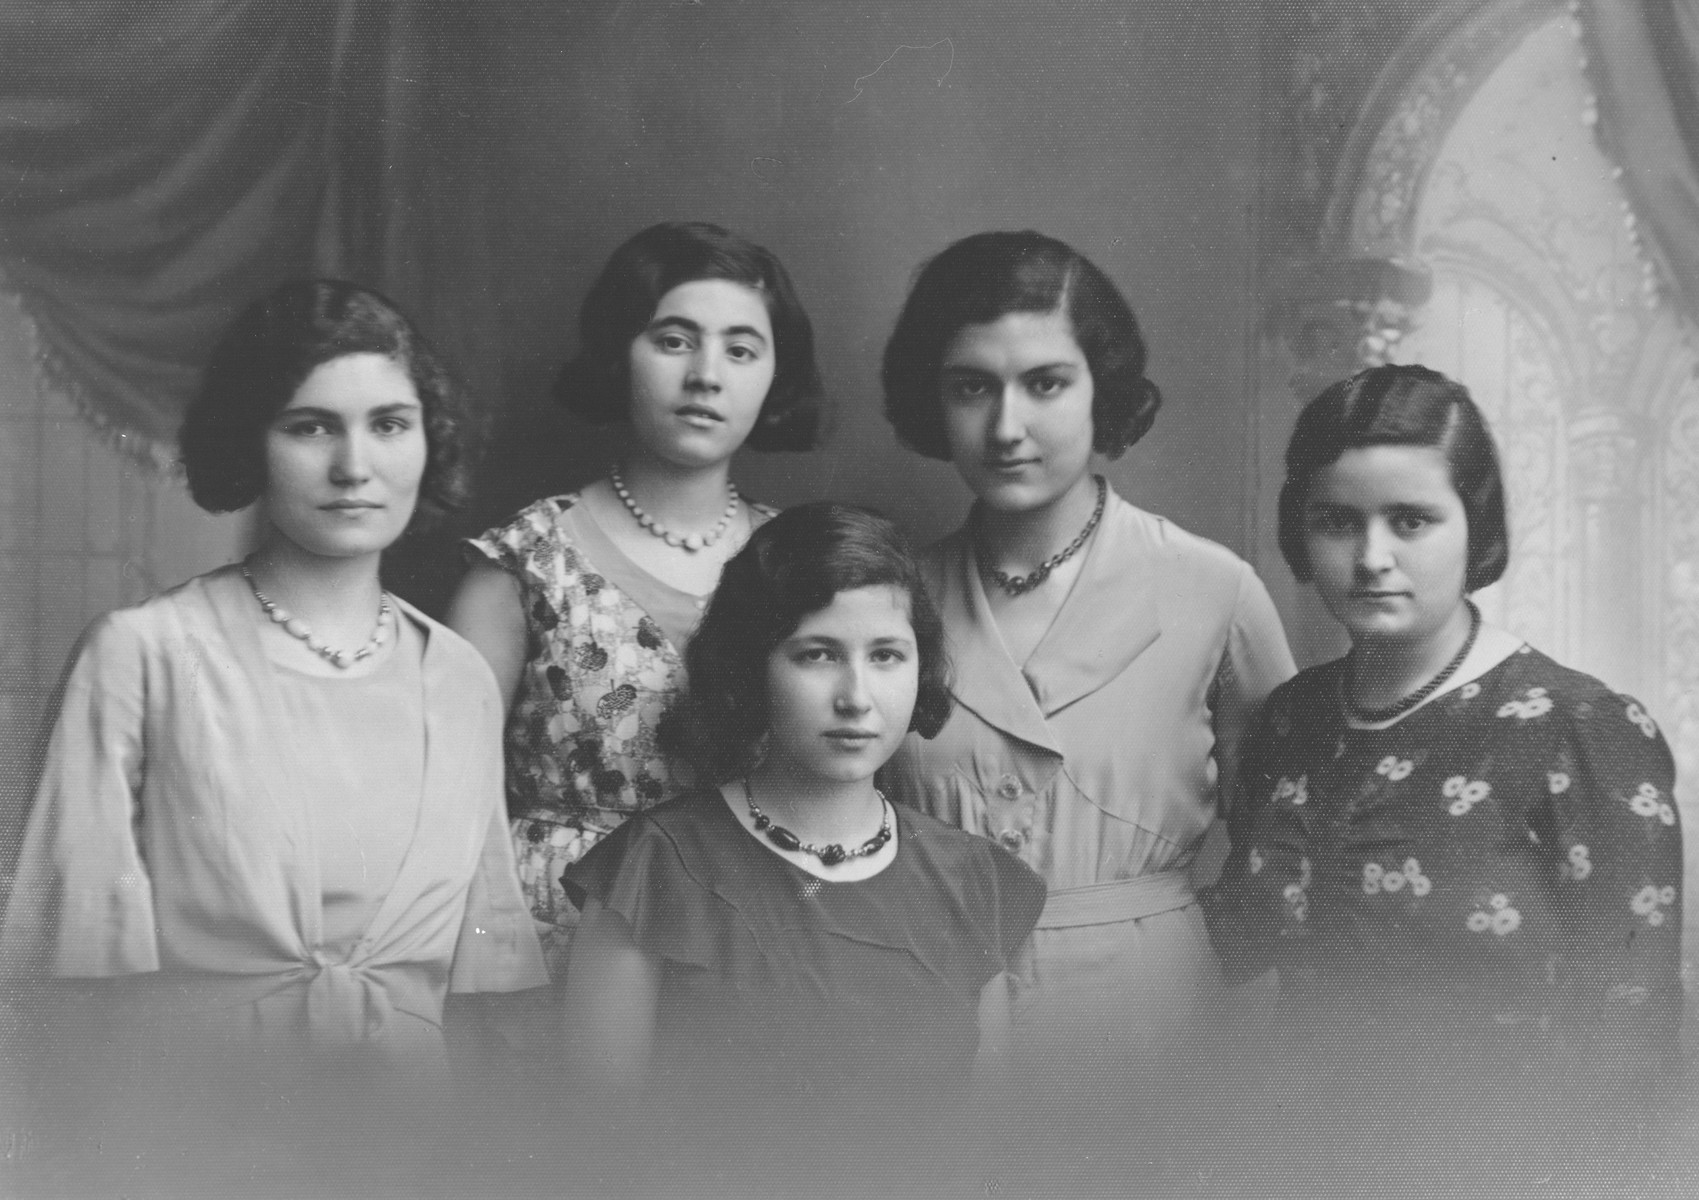 Portrait of five young Albanian women.

Pictured are three sisters and two cousins: Jeannette Matathia (later Levis), Henriette Matathia (later Levis), Fortune Jacoel (perished in Auschwitz), Mathile Matathia (later Sebetai) and Anna Levis (later Osmos).